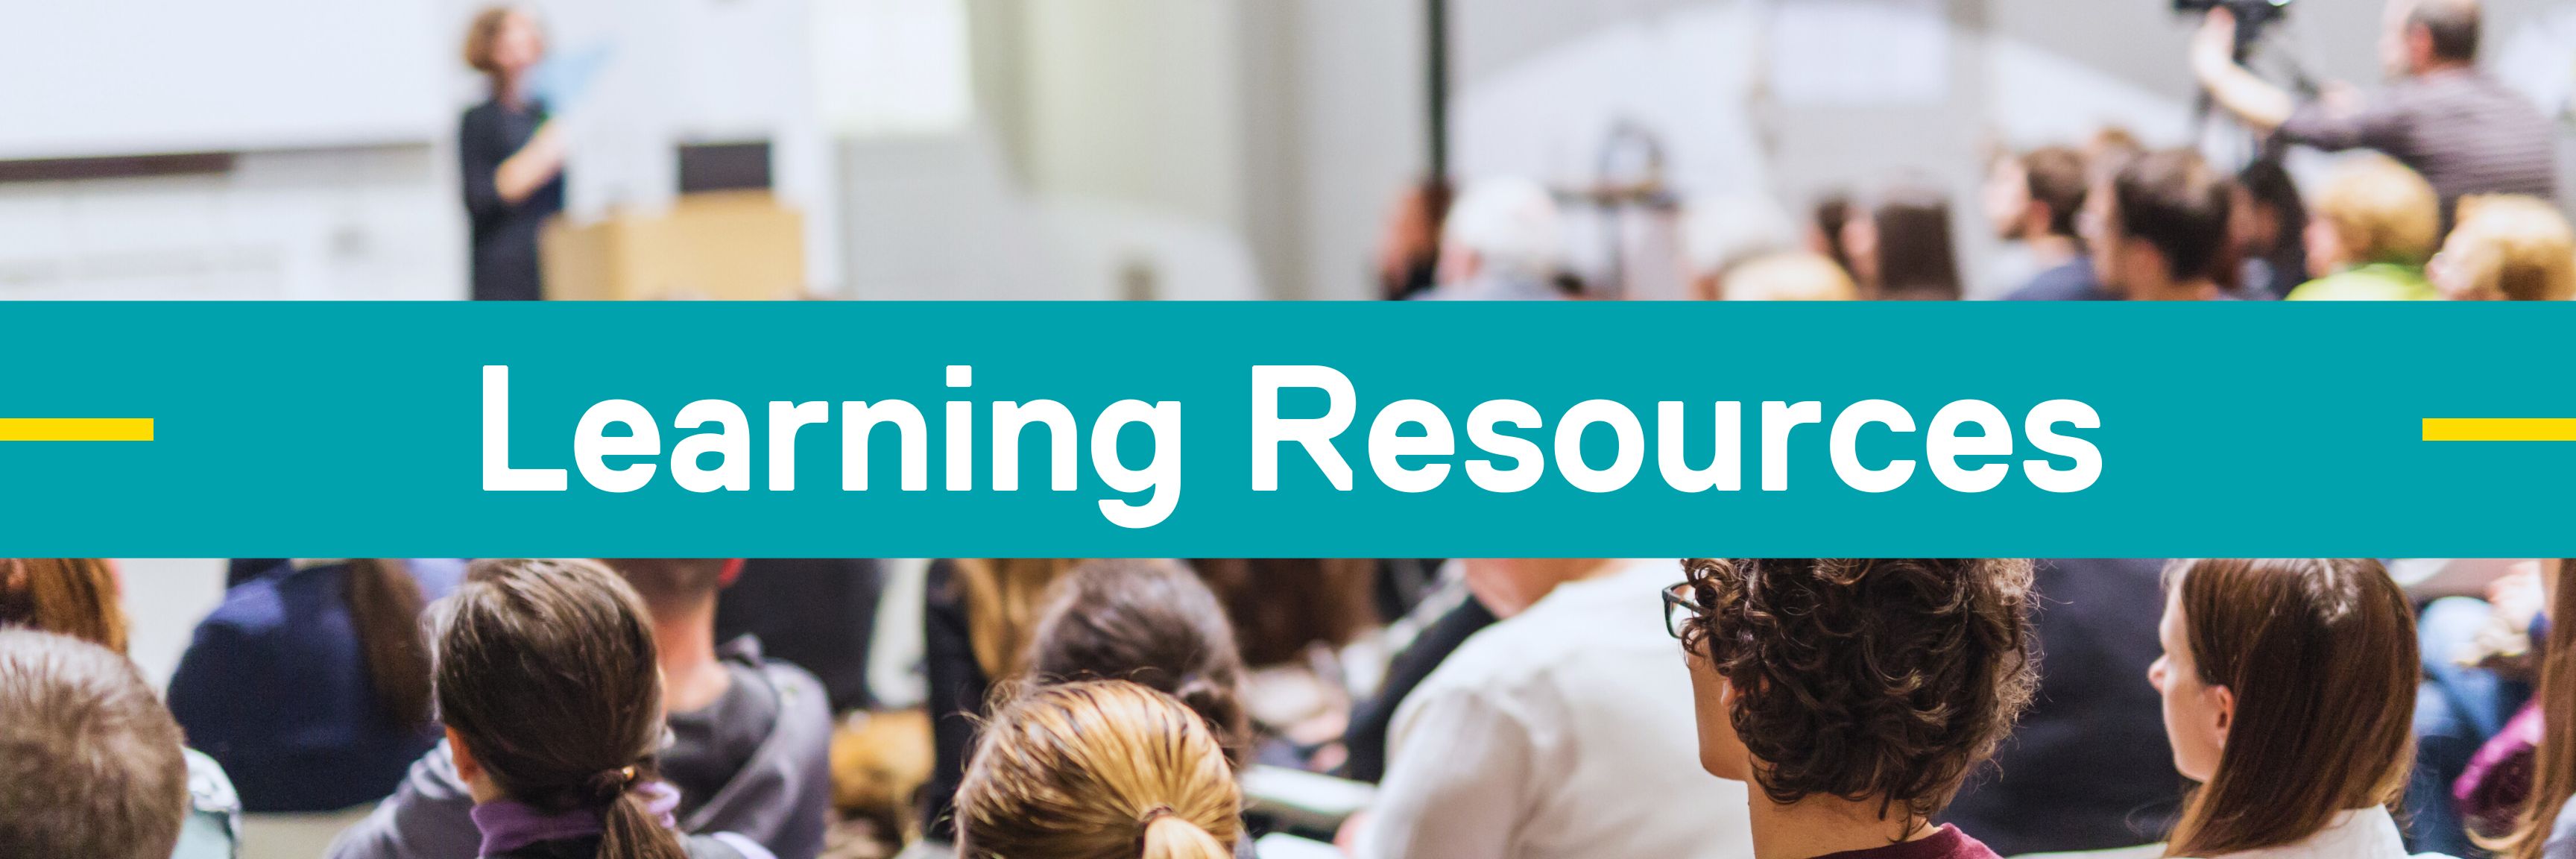 Learning Resources Banner